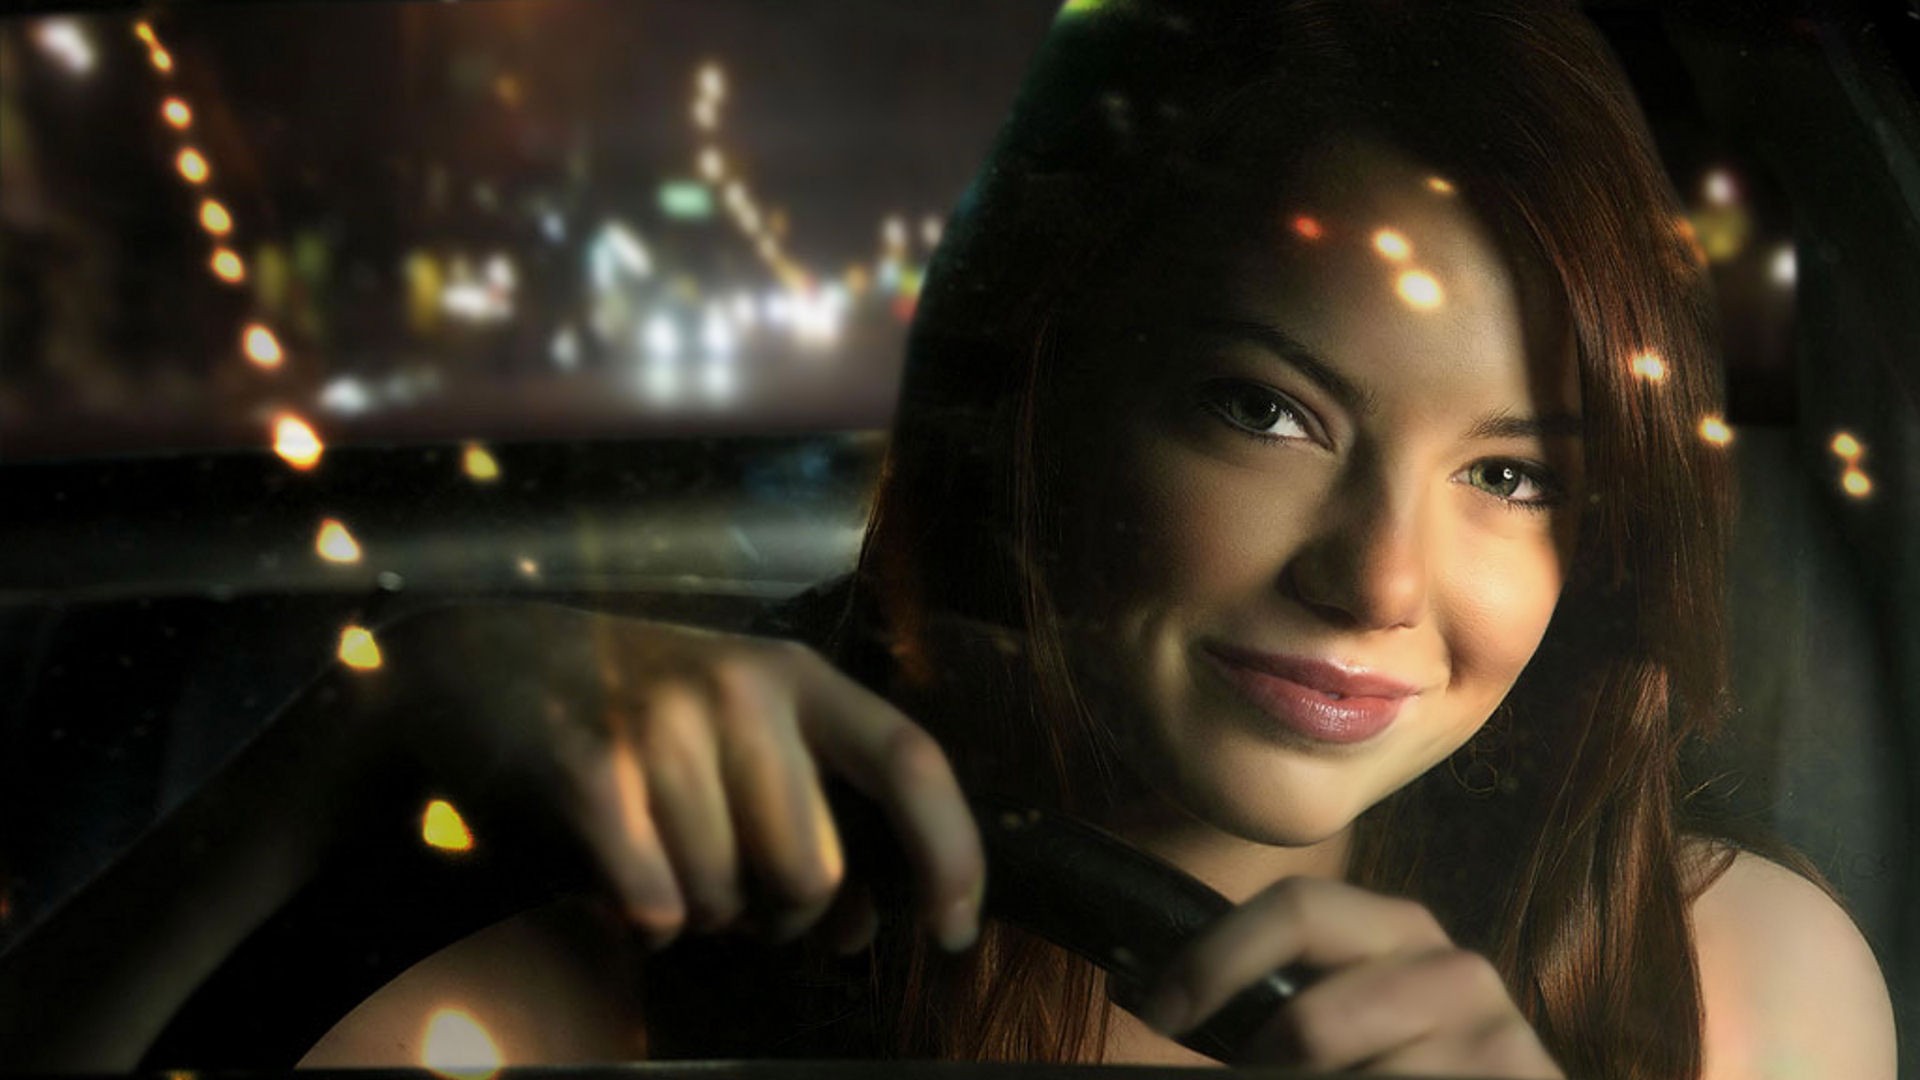 People 1920x1080 Emma Stone actress car lights women with cars hands steering wheel women celebrity face smiling